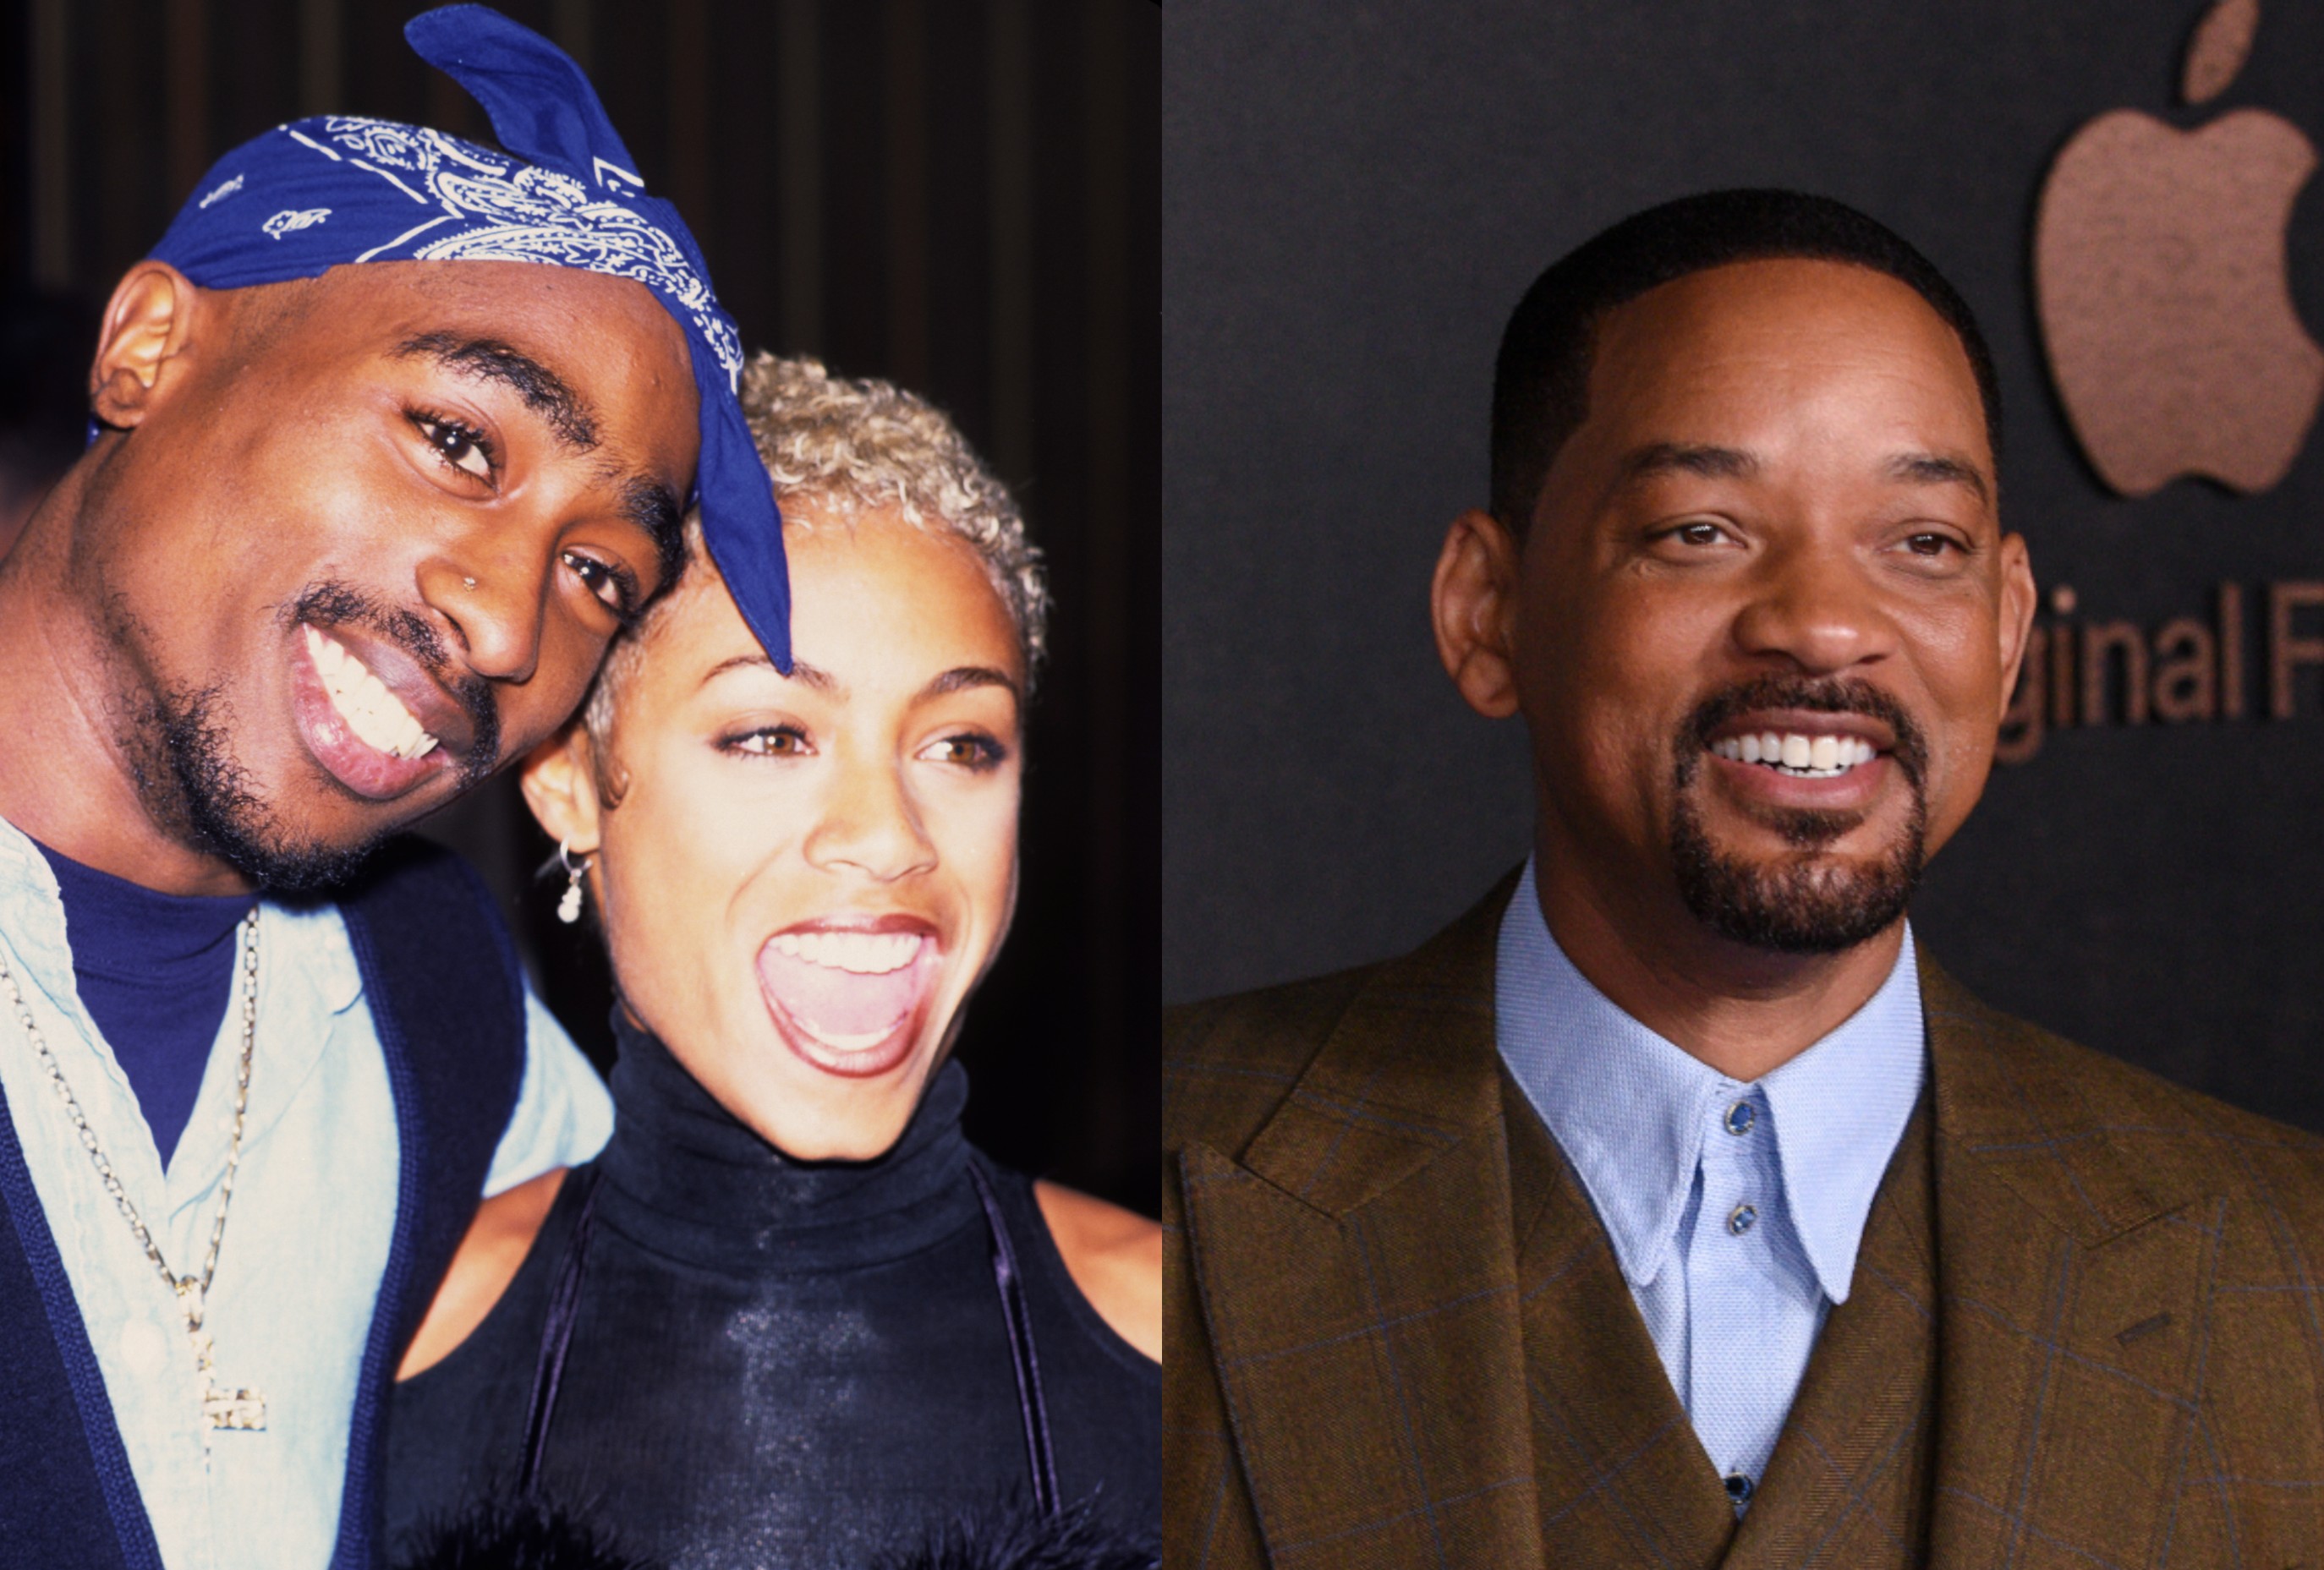 Copious Confessor Jada Pinkett Smith Reveals Her ‘Soulmate’ Tupac Shakur Proposed, Shares Shock At Will Smith Calling Her His ‘Wife’ After Oscars Slap